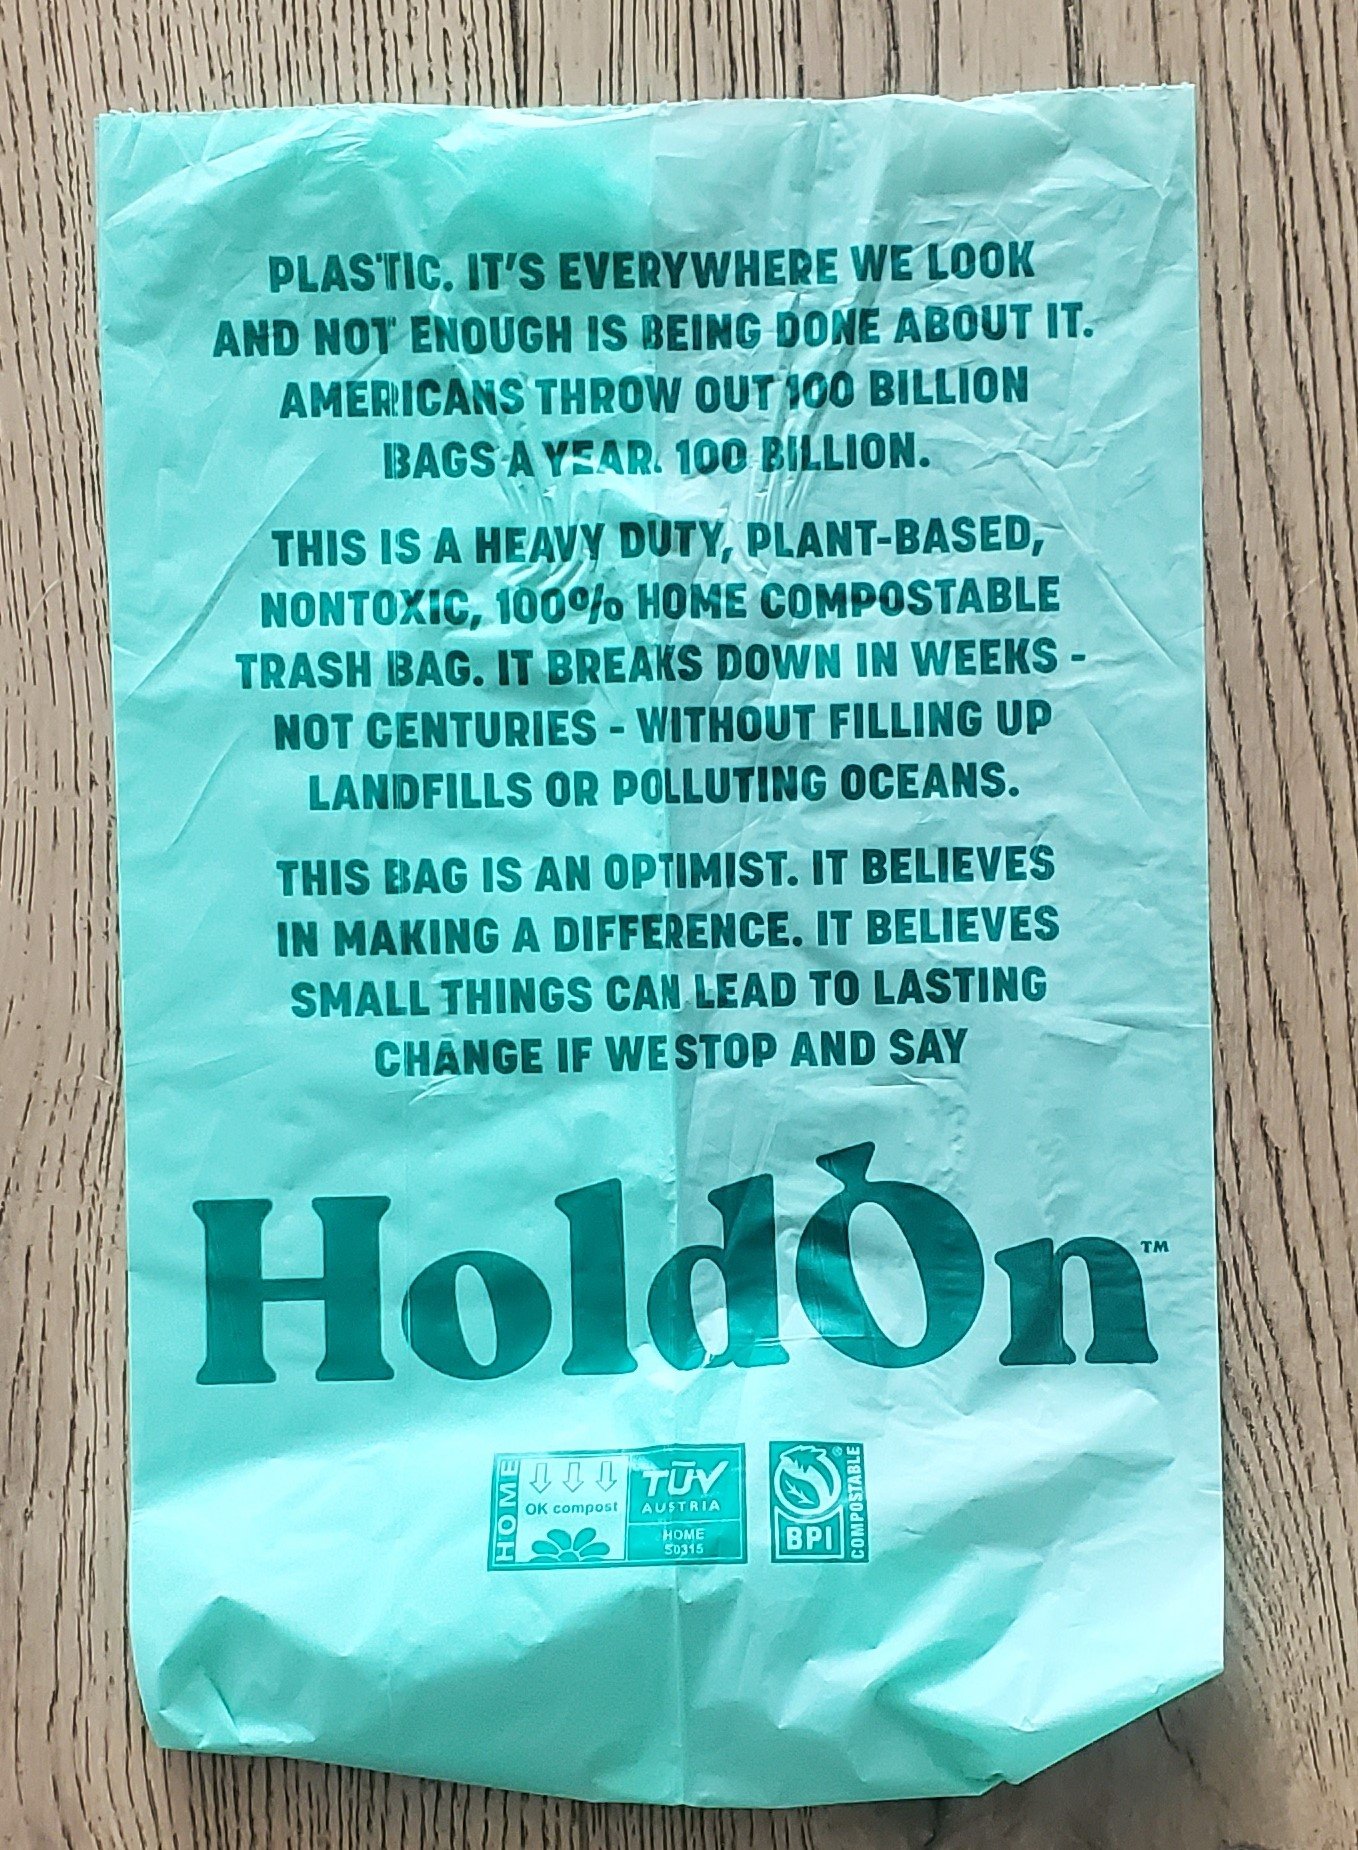 HoldOn Compostable Bags Review: Do They Work?